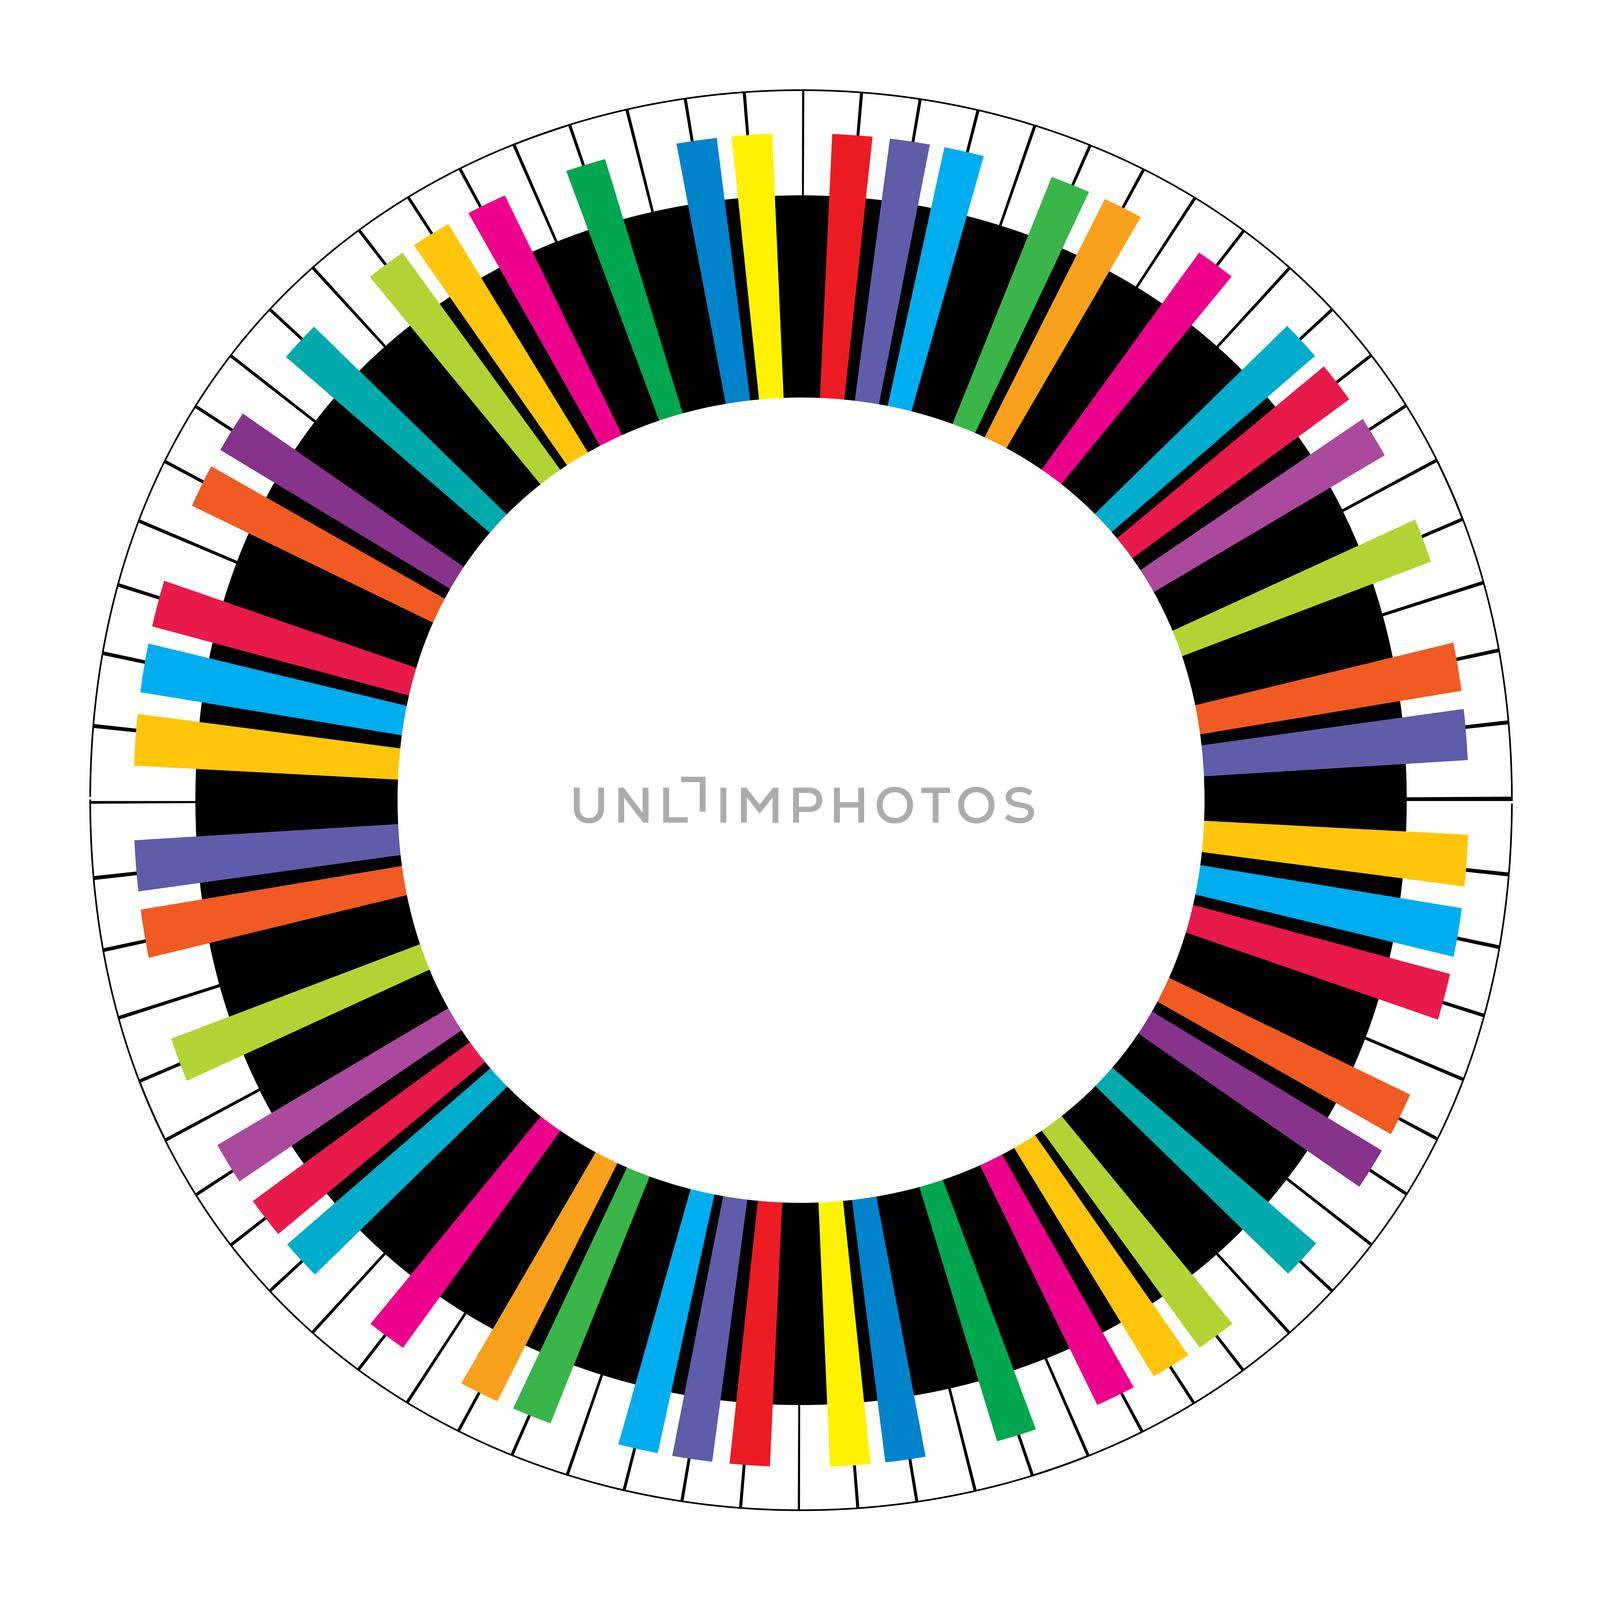 Abstract colored circular piano keys on white background by hibrida13